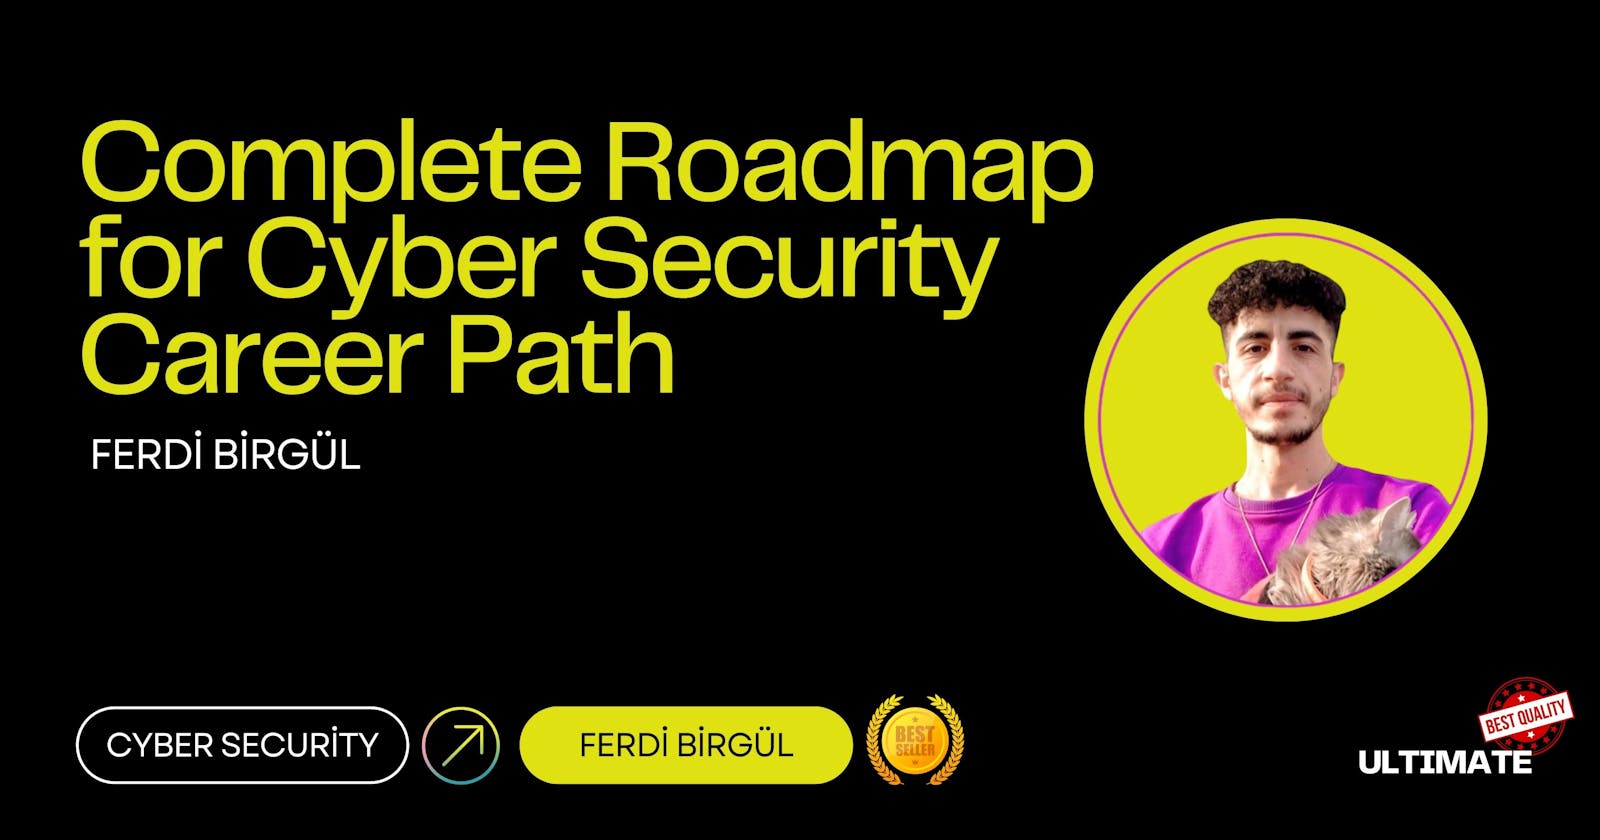 Complete Roadmap for Cyber Security Career Path